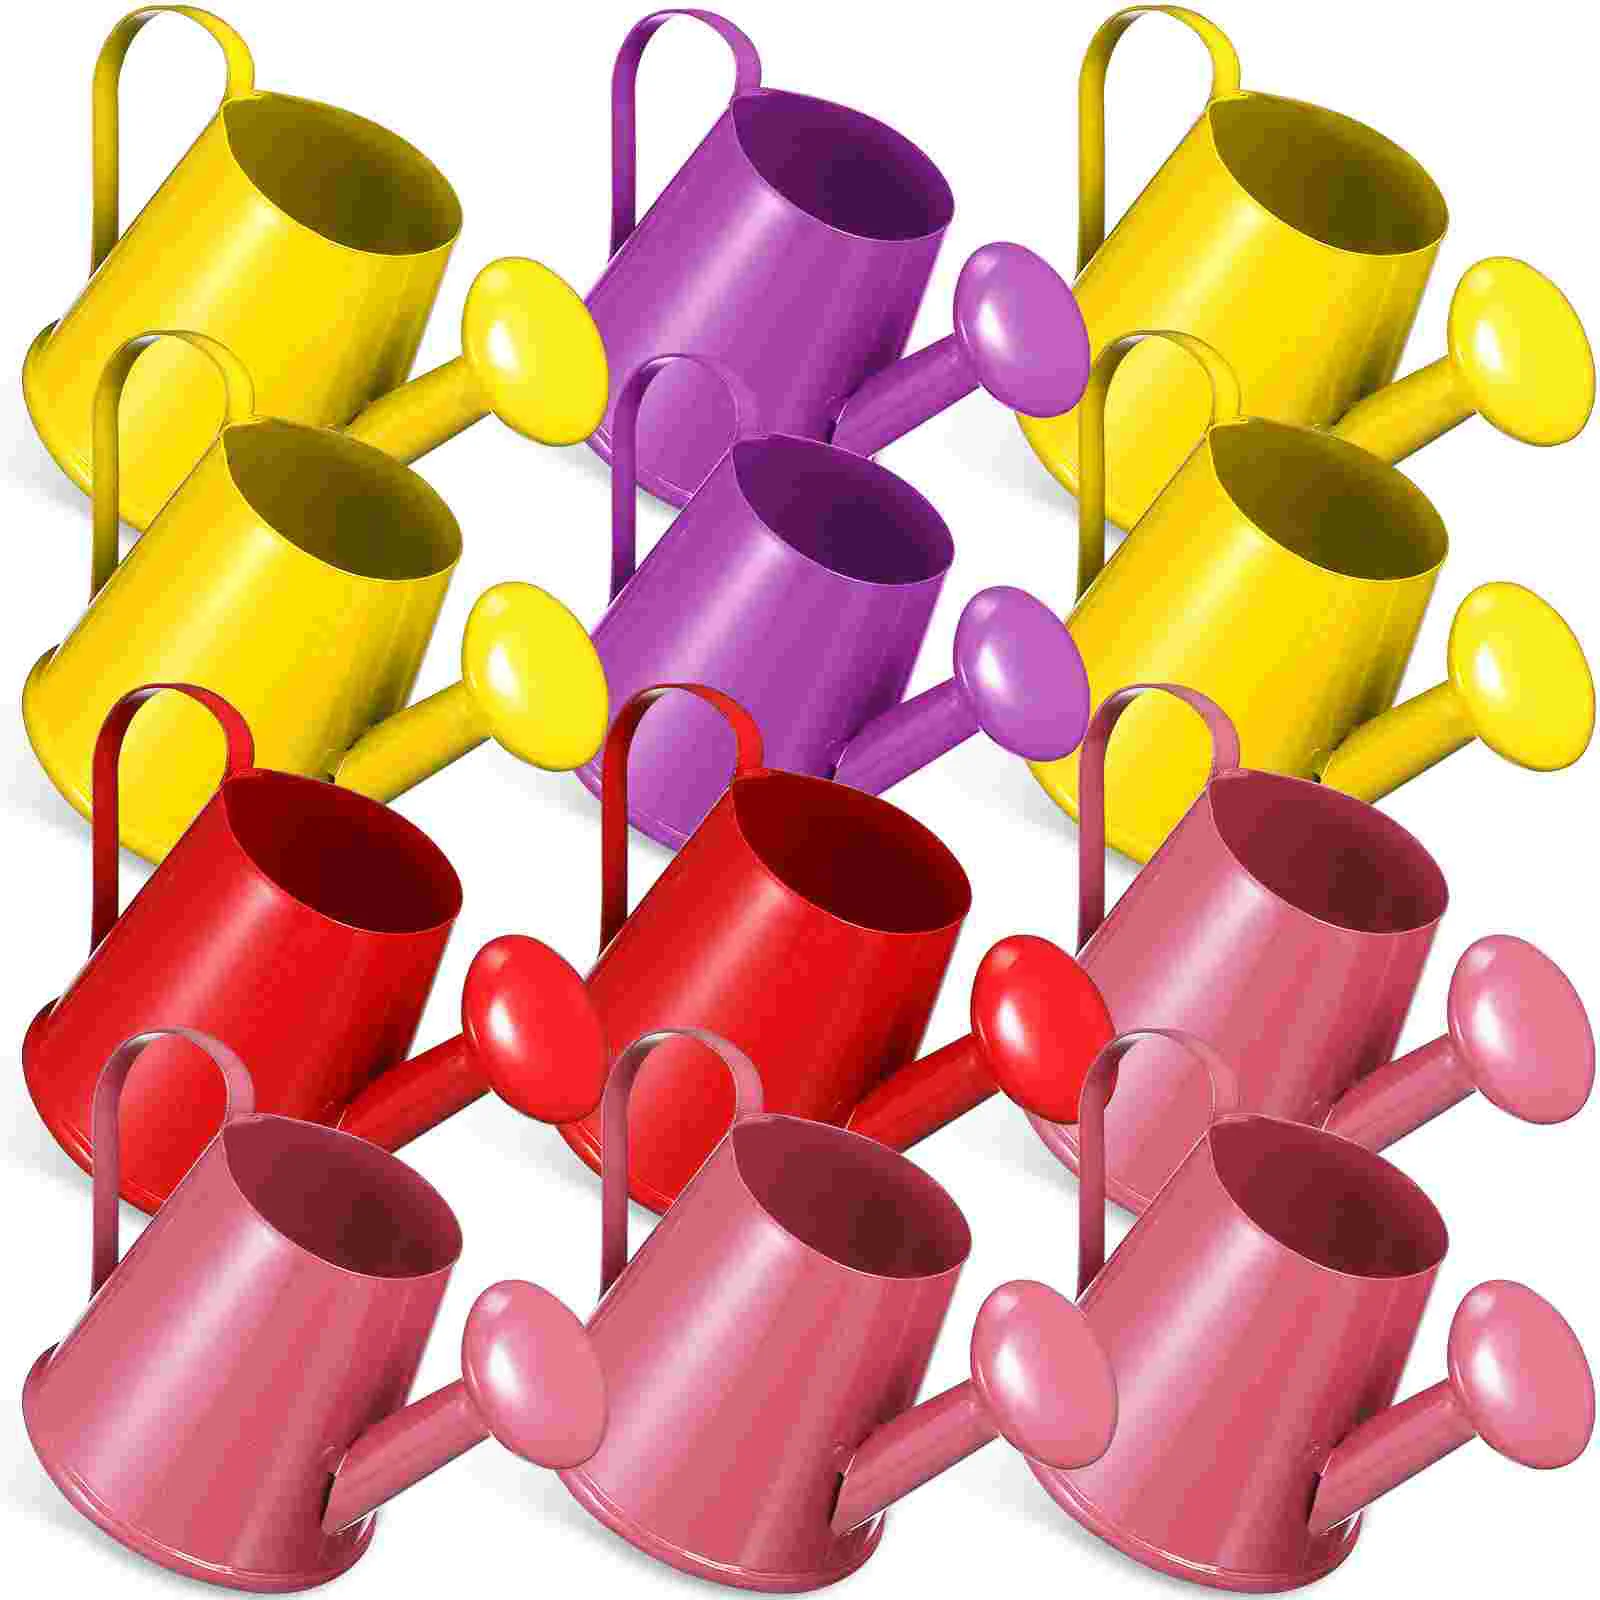 

12 Pcs Watering Cans for Kids Small Iron Watering Cans Kids Bath Watering Can Toys Beach Sprinkler Toys Photo Props